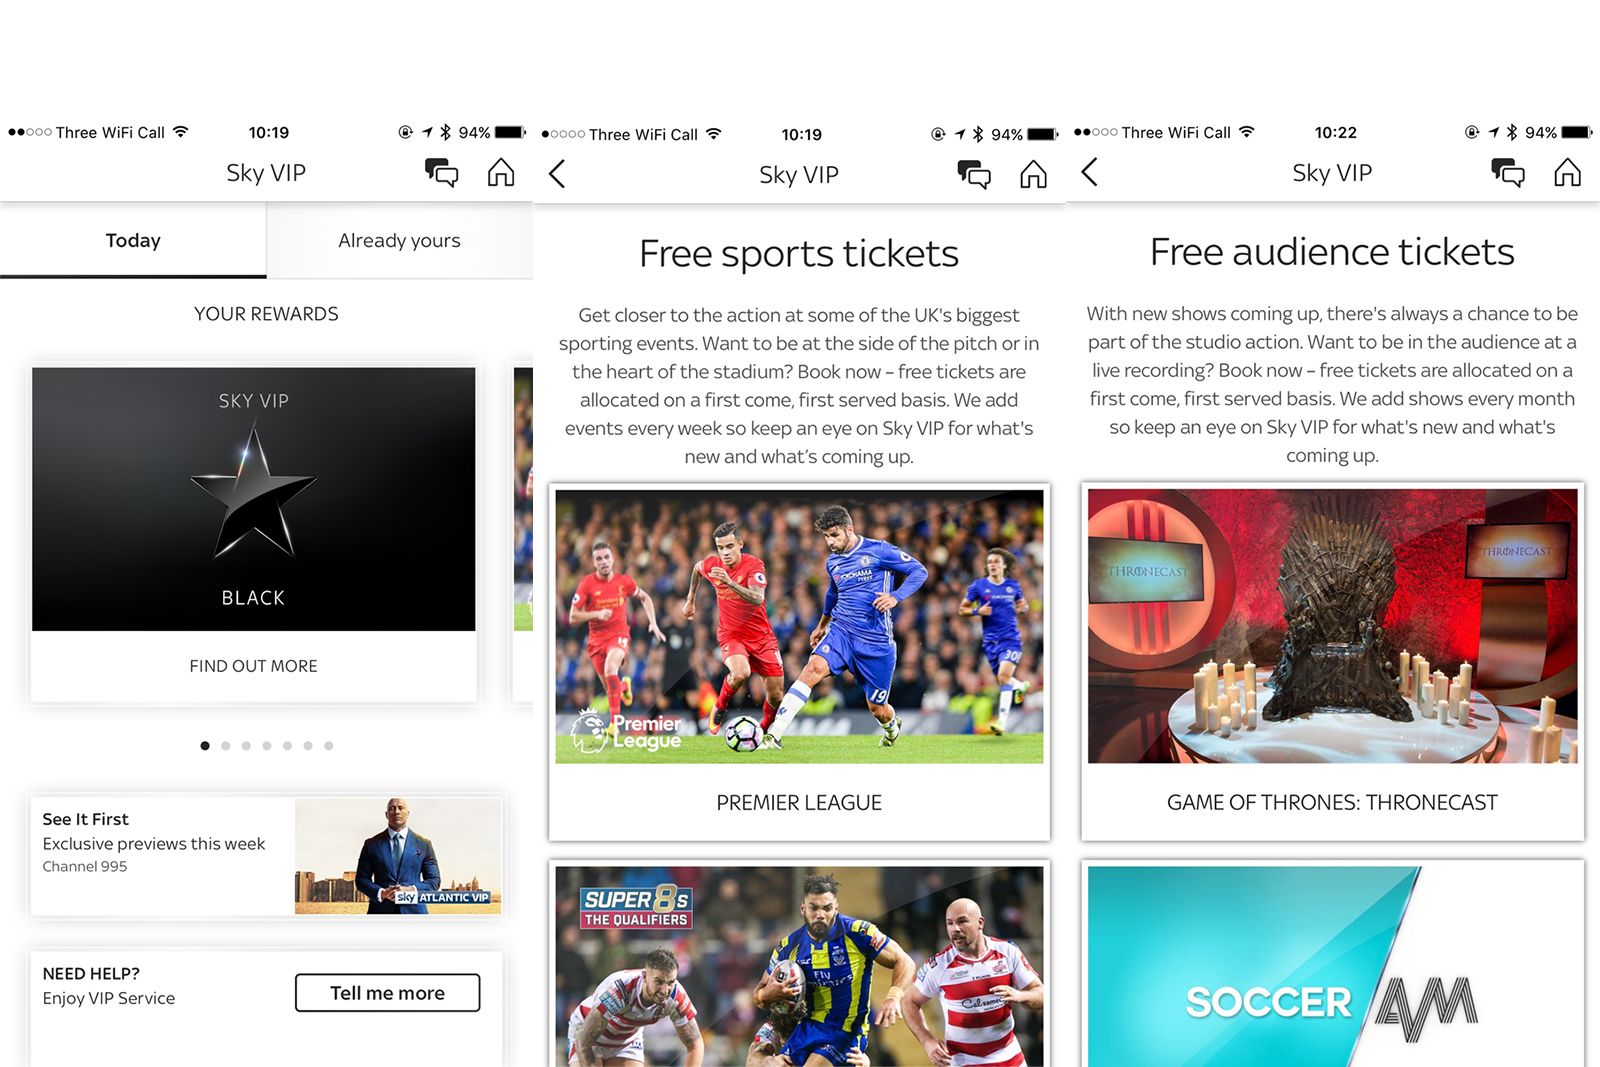 Sky VIP rewards customers with free tickets and priority service image 1